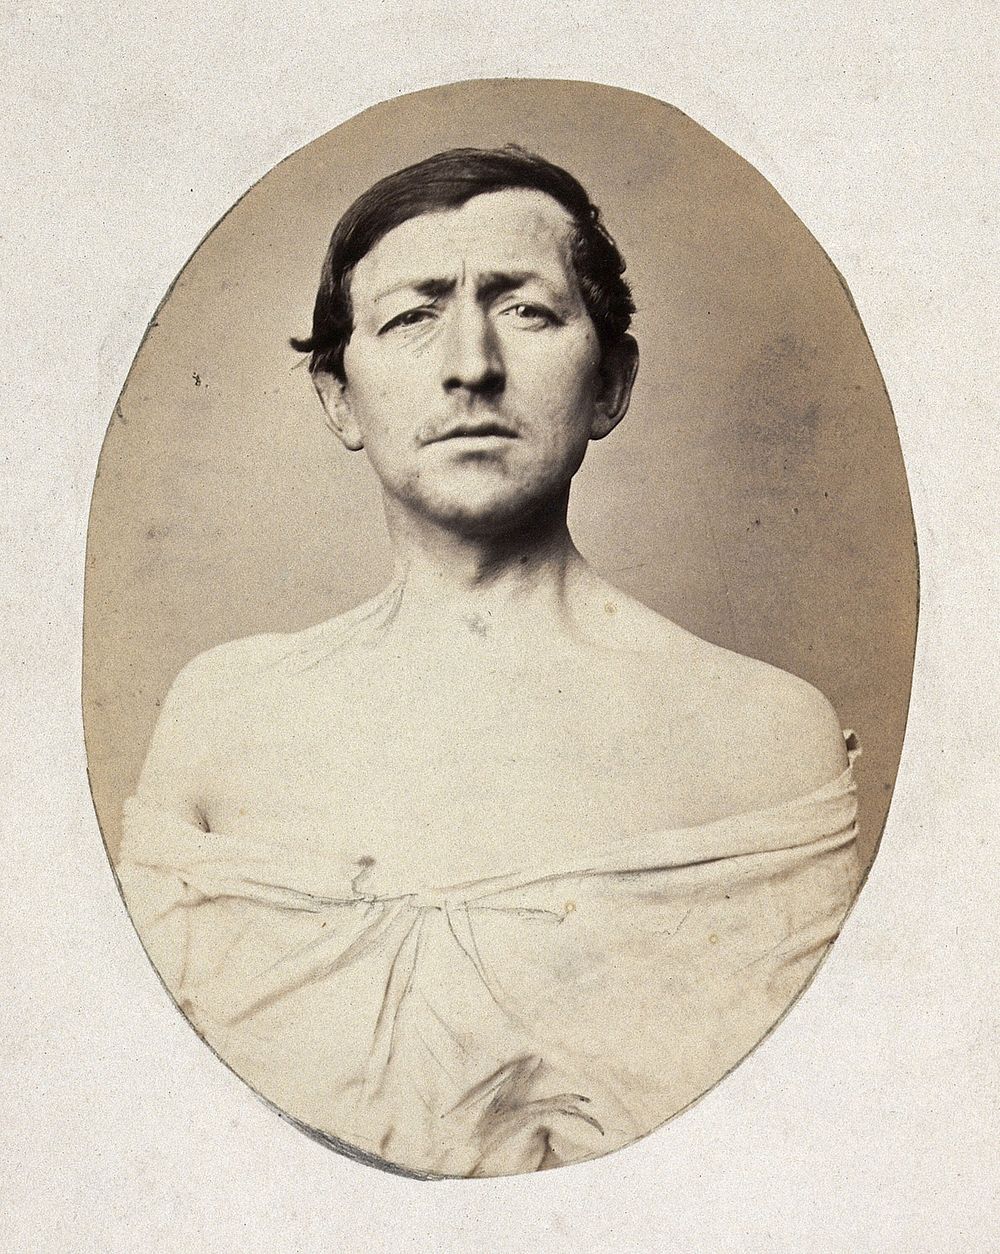 A man, head and shoulders; his shirt undone. Photograph by L. Haase after H.W. Berend, 1863.